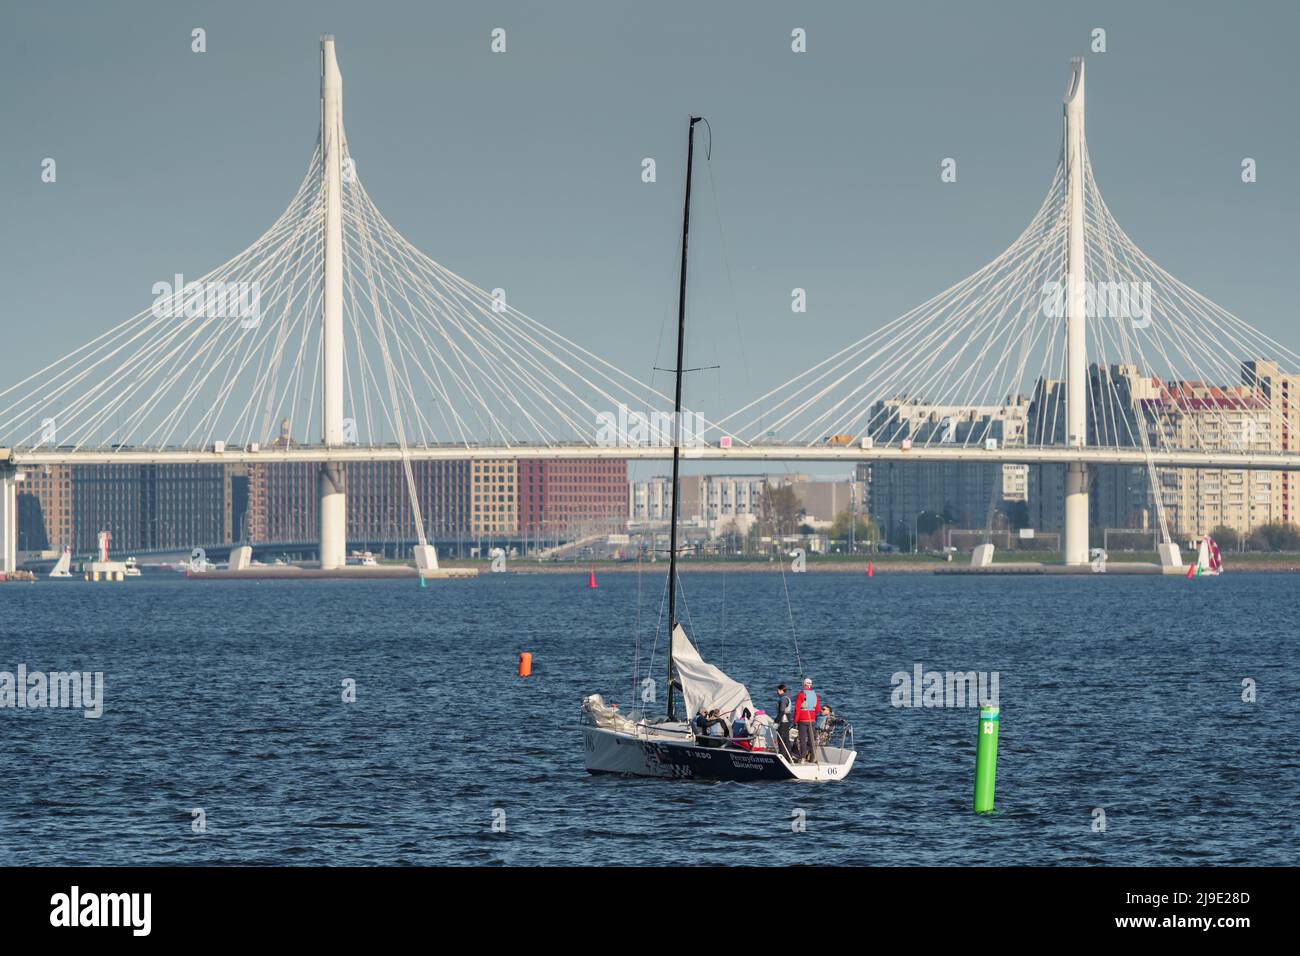 Russia, St. Petersburg, 20 May 2022: Sailing boats in the background of the new cable stayed bridge in sunset light Stock Photo